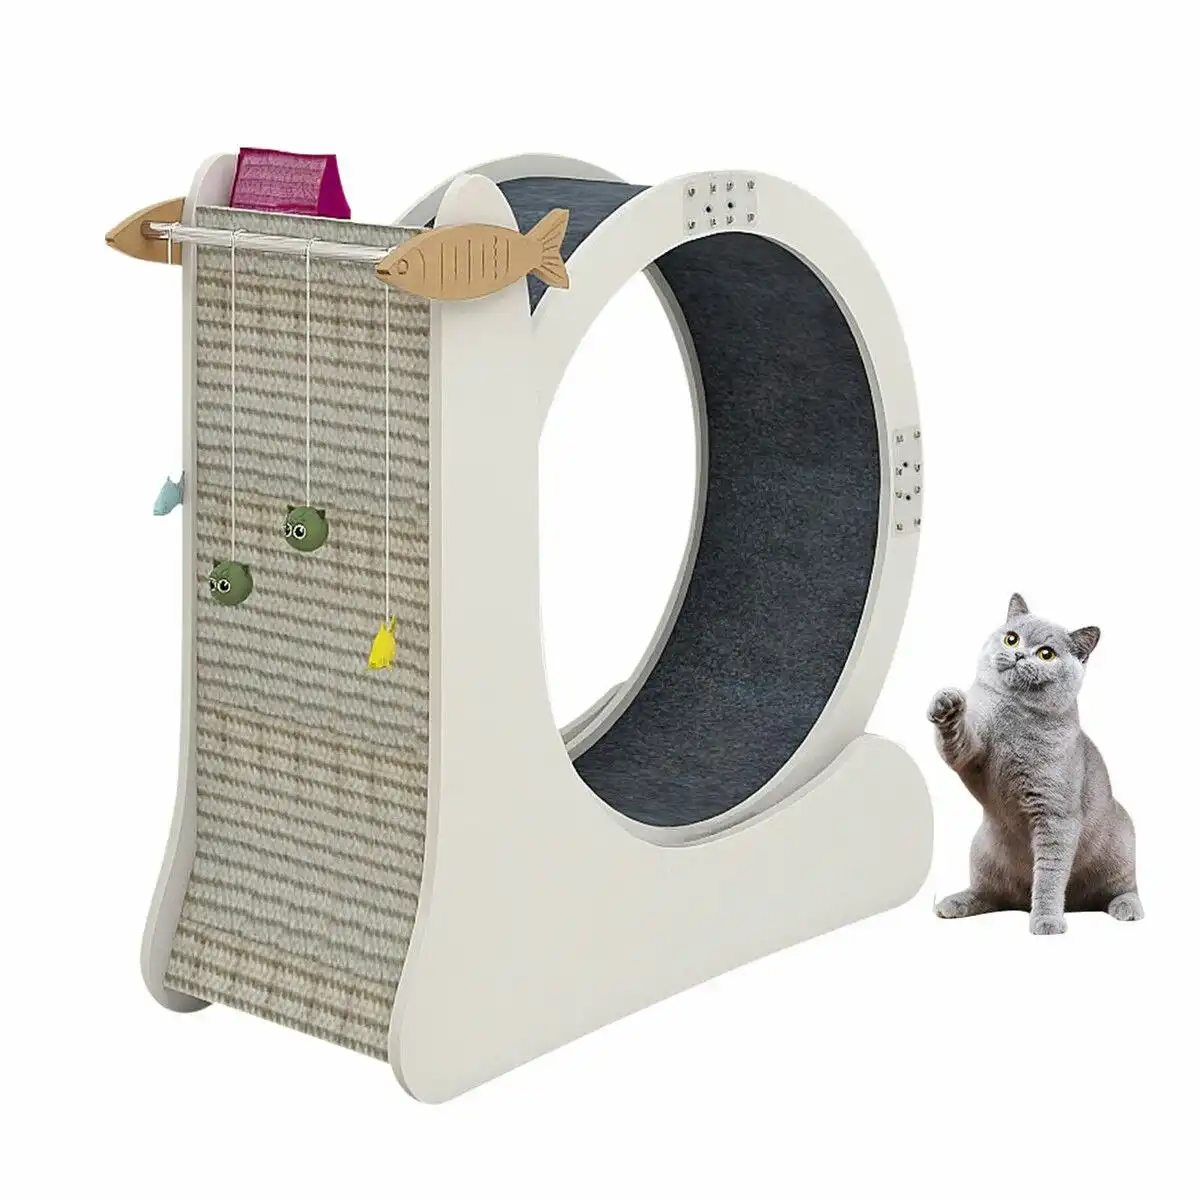 Pet Scene Cat Exercise Wheel Toy Running Treadmill Exerciser Scratcher Board Furniture Roller Sports Play Gym Equipment with Carpet Runway